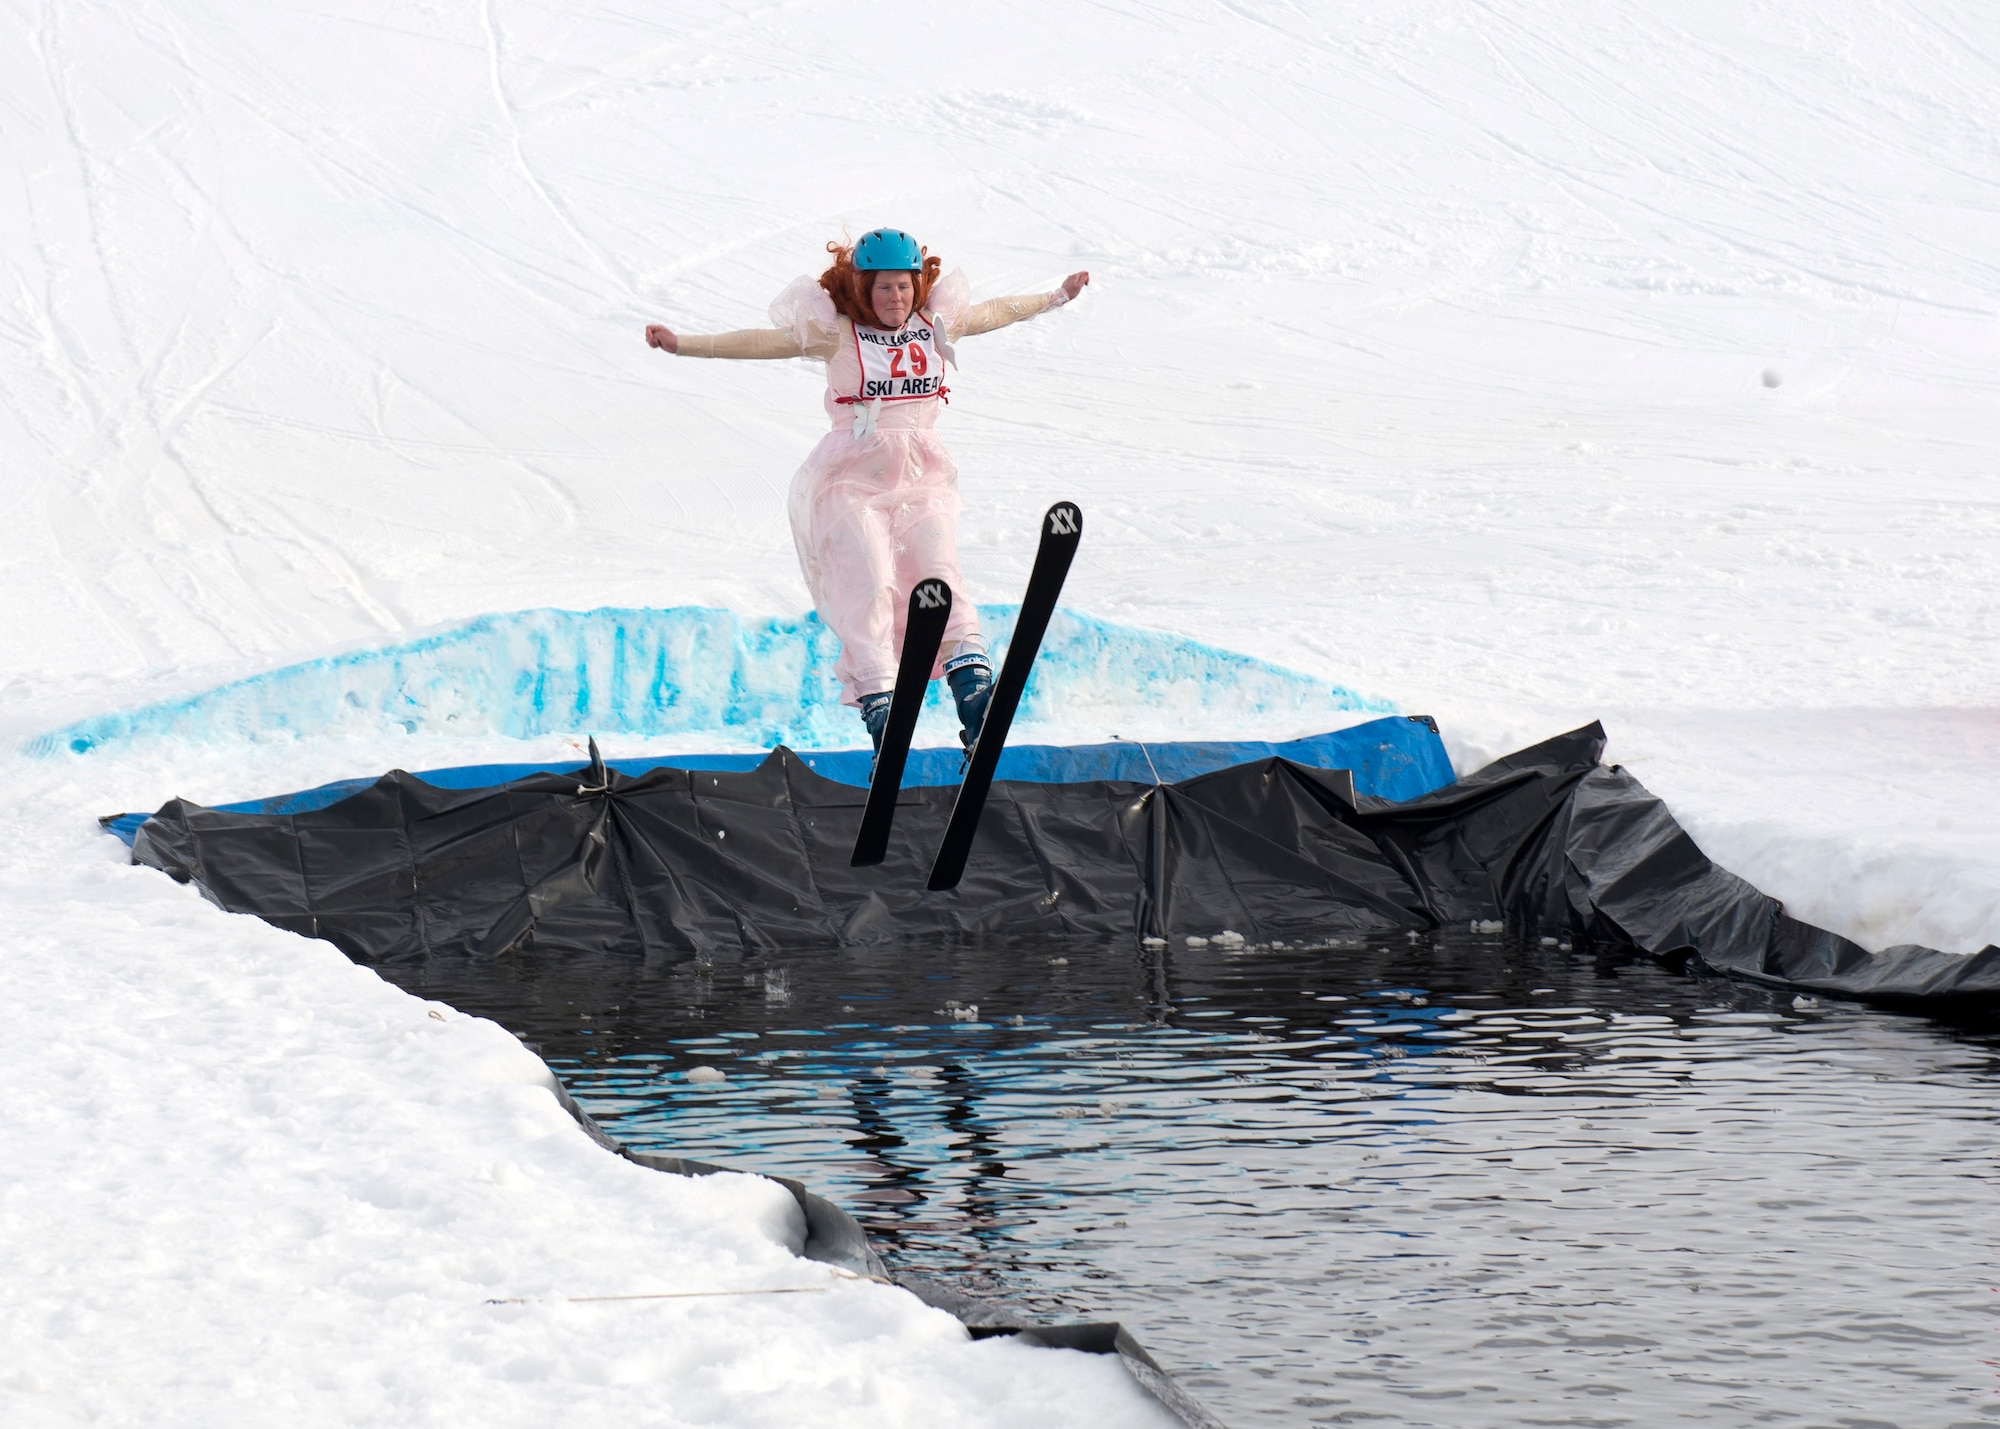 Laura Long, a participant of the 2018 Slush Cup, skis into the slush pond at Joint Base Elmendorf-Richardson’s Hillberg Ski Area, March 18, 2018. The Slush Cup is a two-fold annual event celebrating the change in weather, consisting of skiers and snowboarders trying to make it across a man-made slush pond without falling.